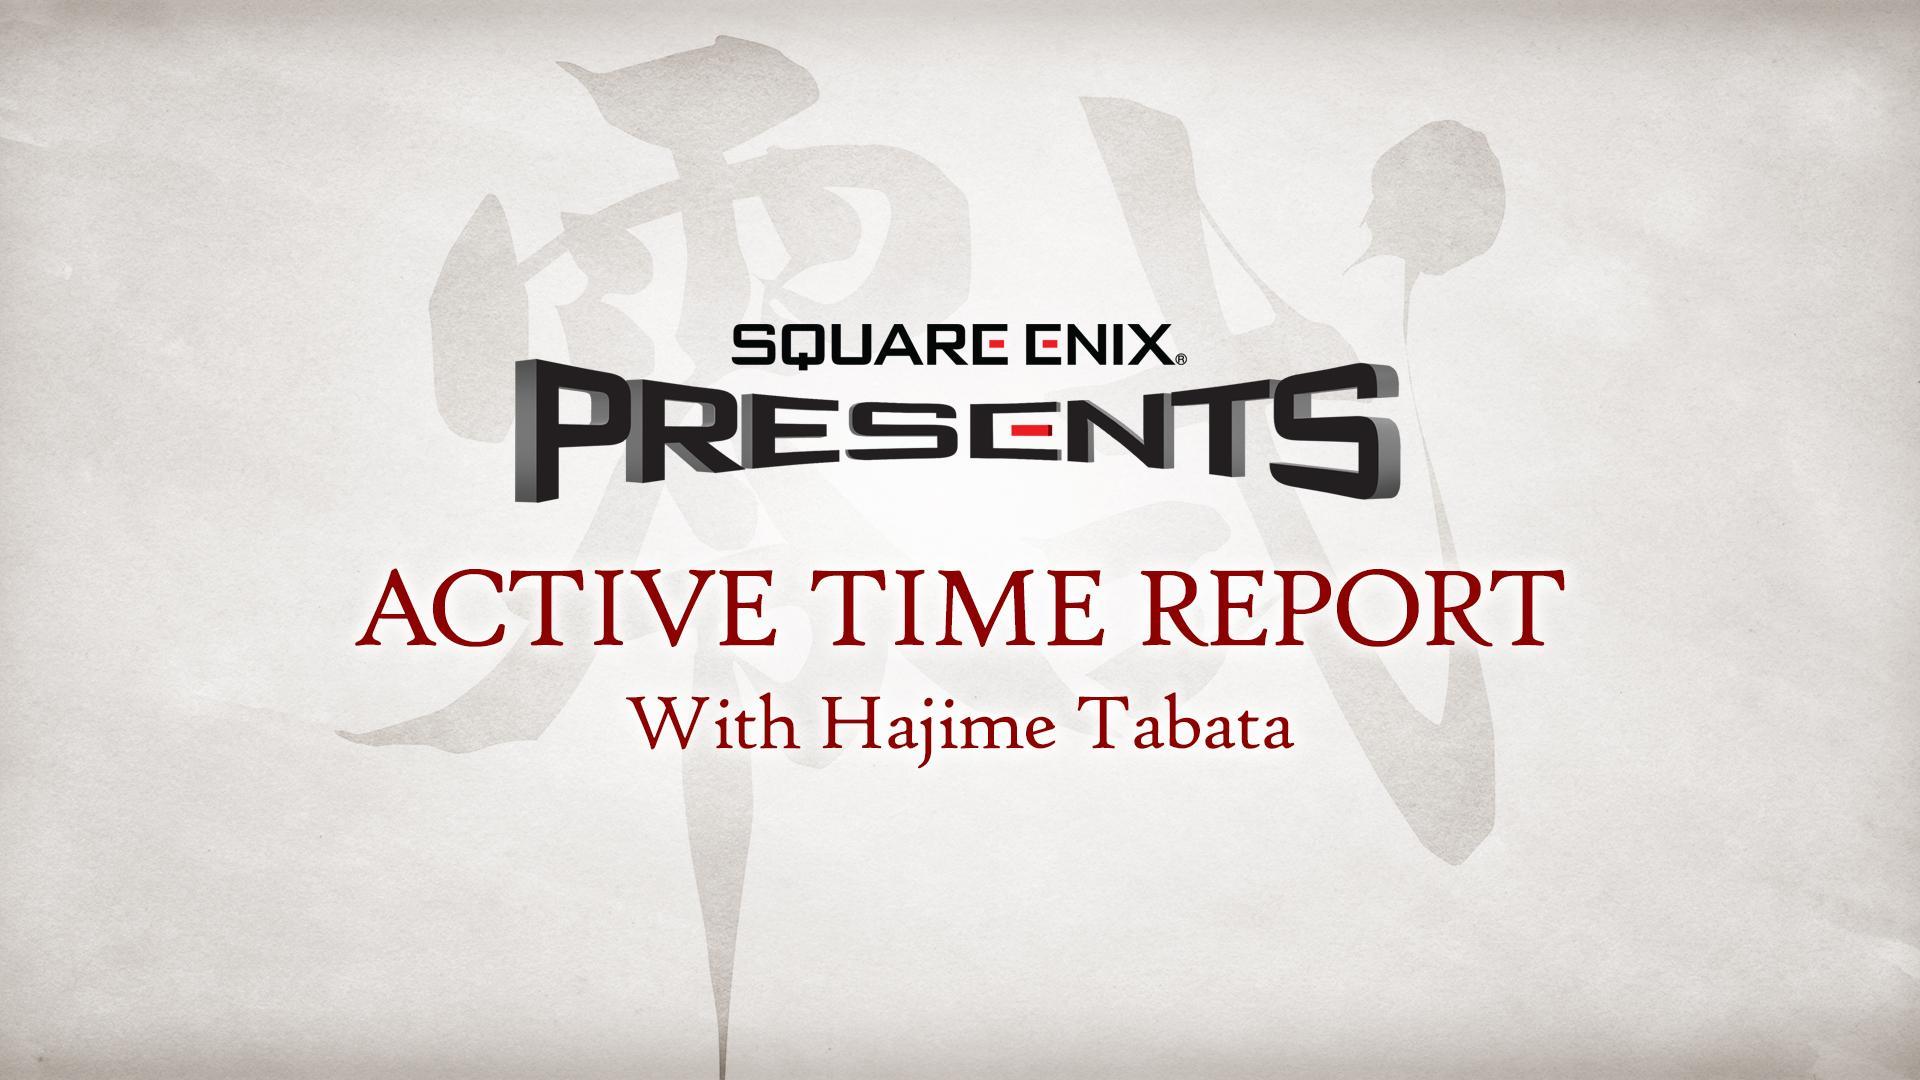 A New Active Time Report Coming Thursday From Square